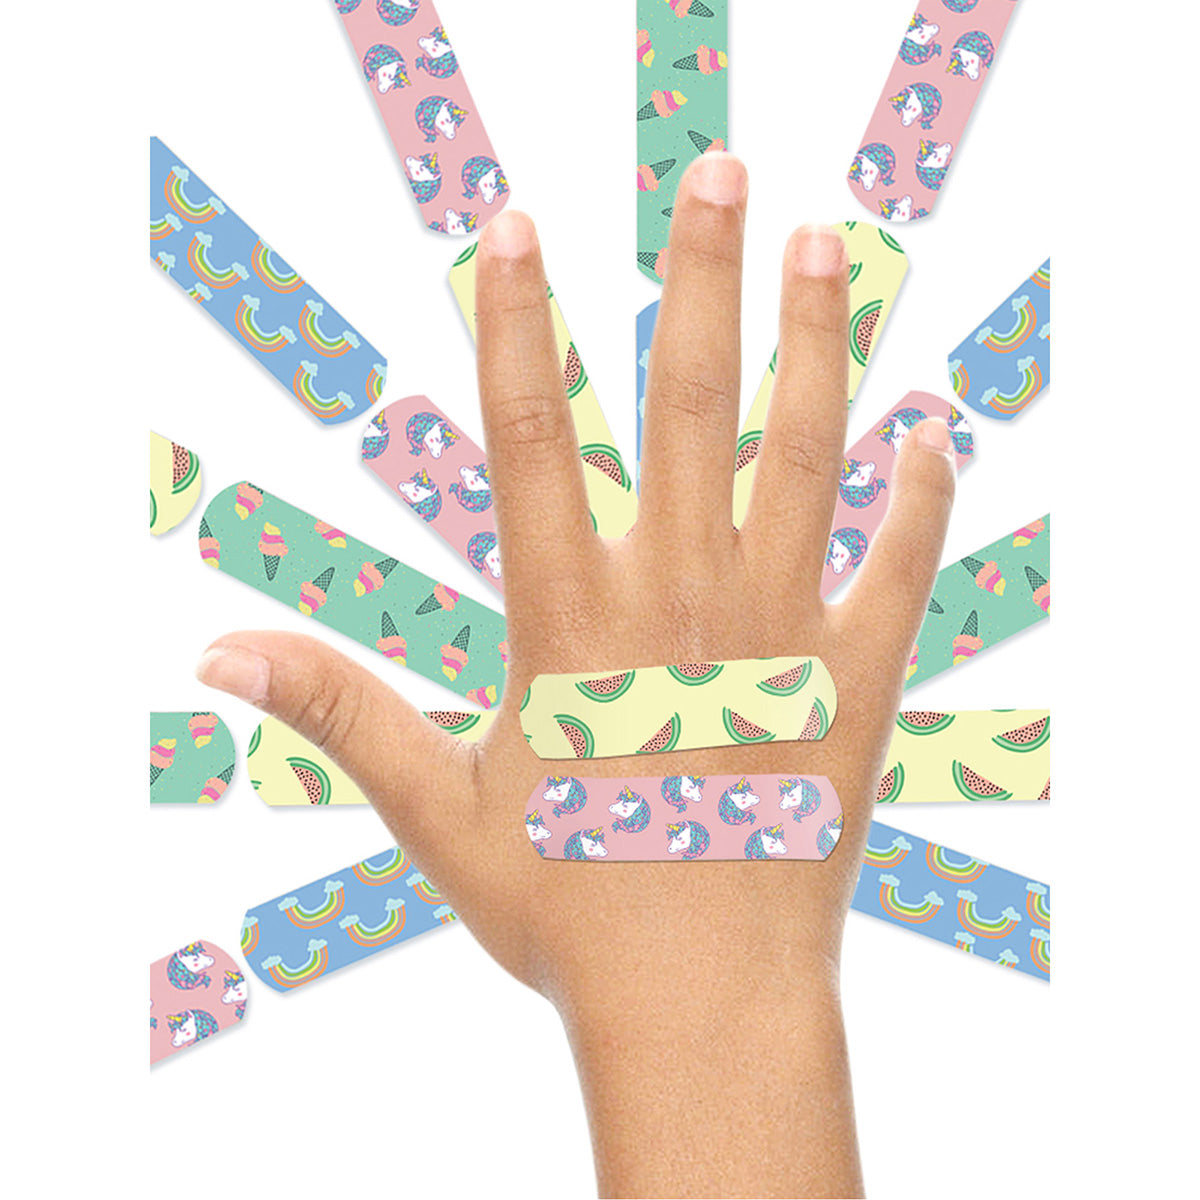 'Ouchie Printed Bandages'  Combo Pack of 3 (20 x 3 = 60) (2 Pink & 1 Orange)